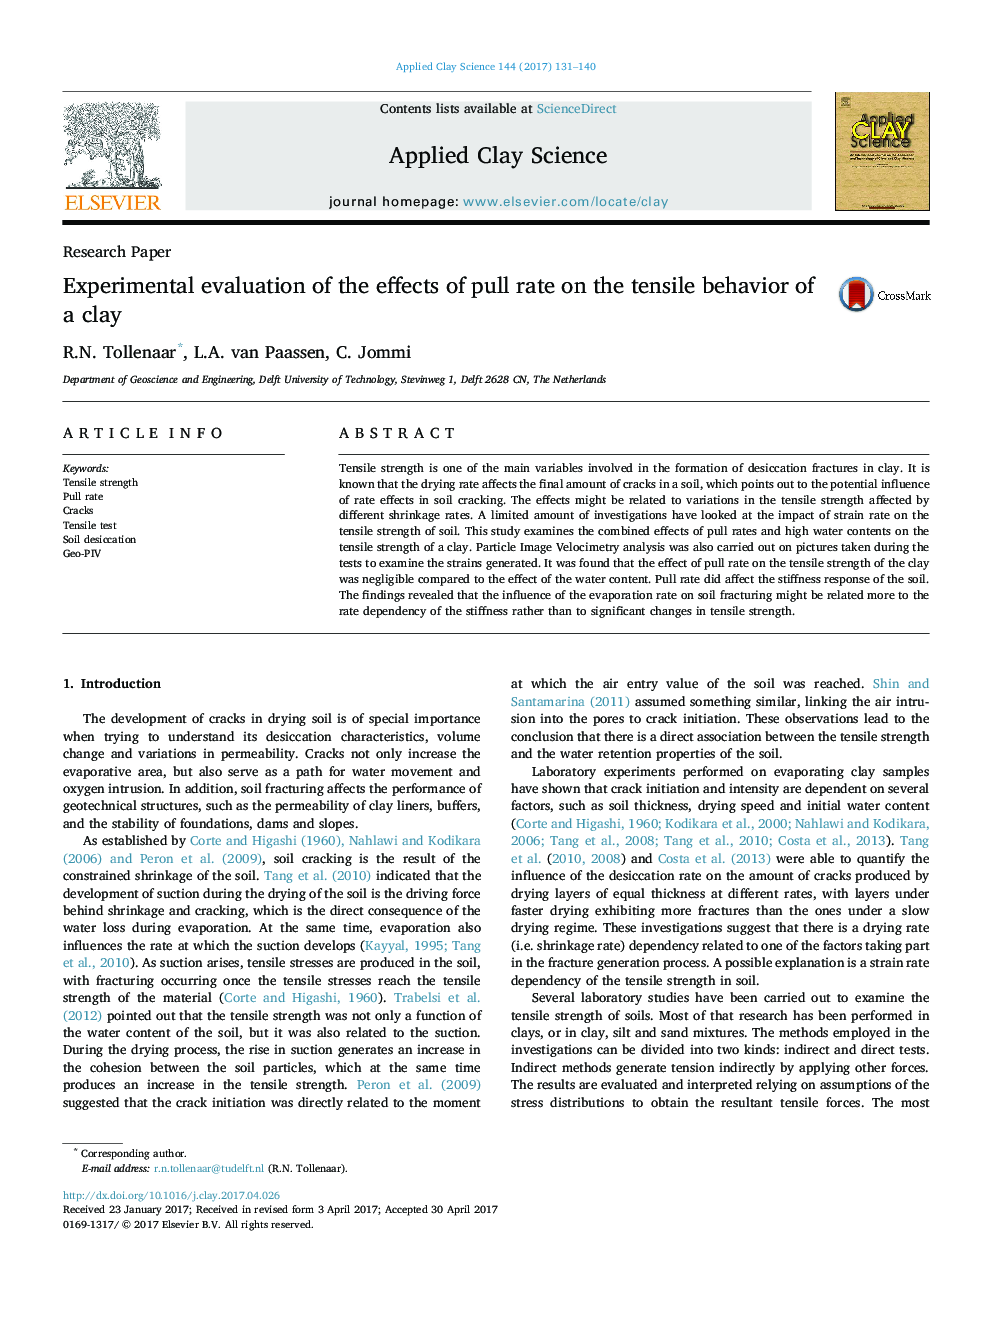 Experimental evaluation of the effects of pull rate on the tensile behavior of a clay